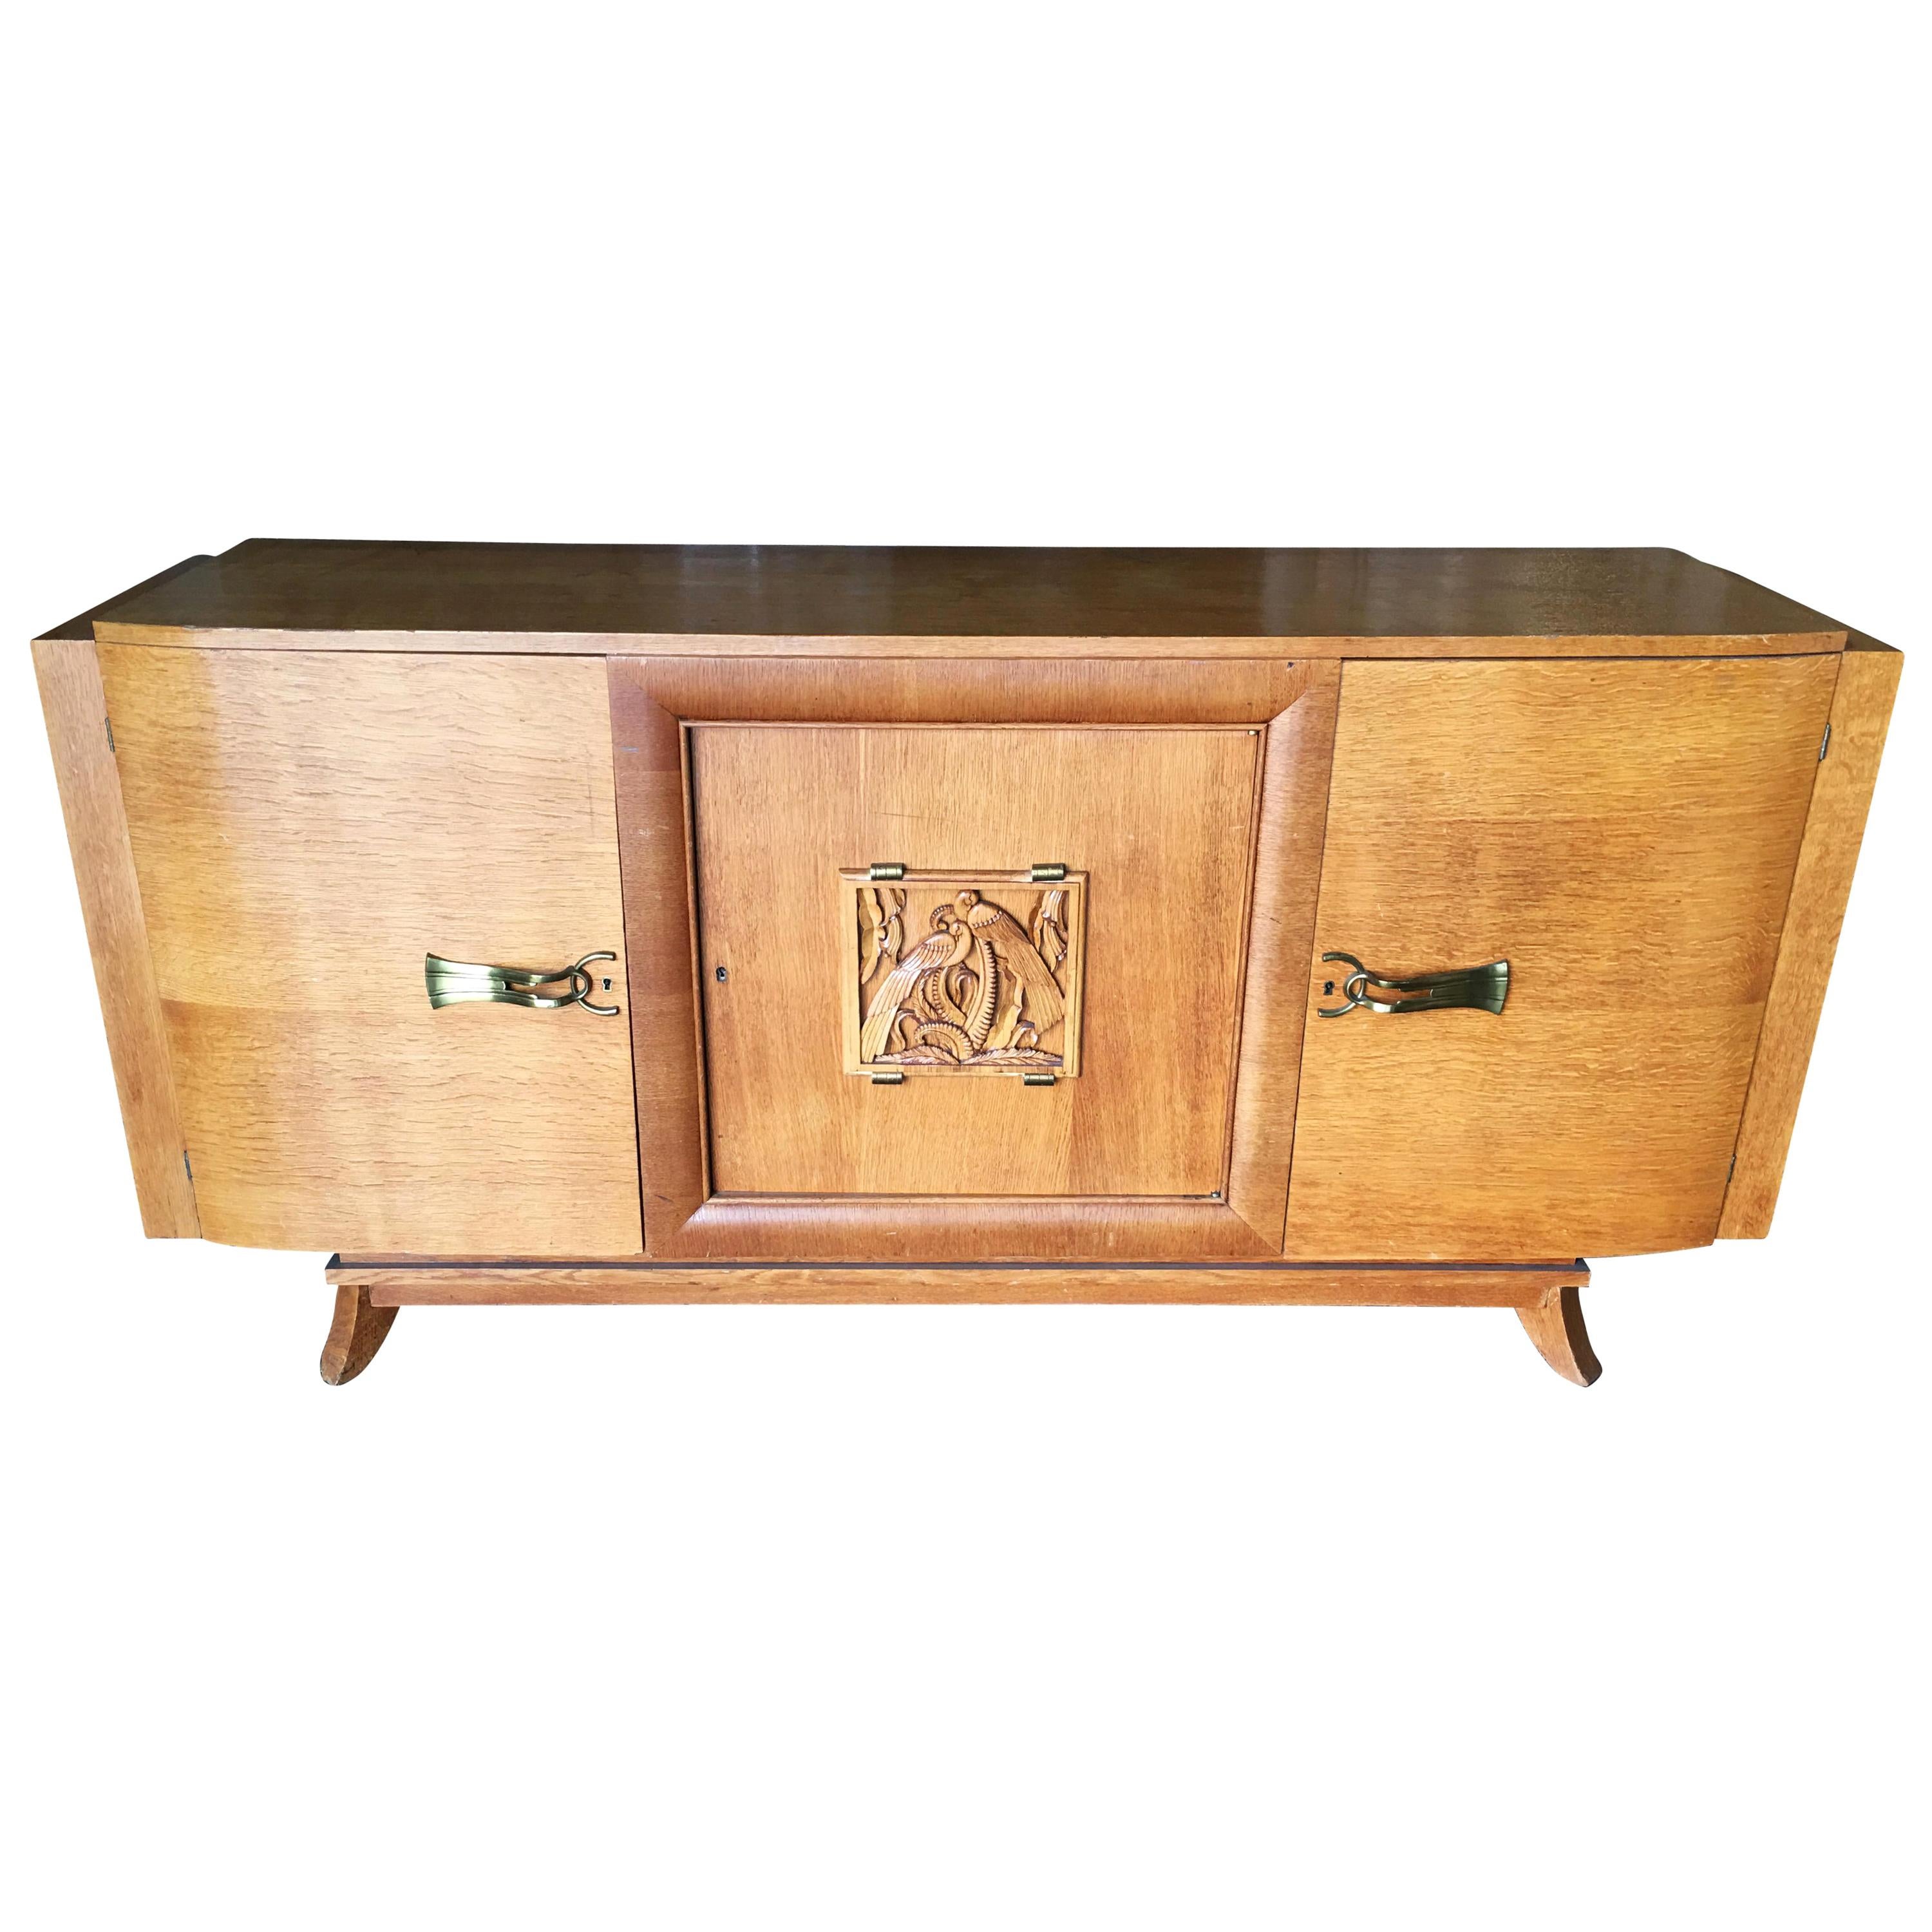 James Mont Style Sideboard with Carved Art Sculpture For Sale